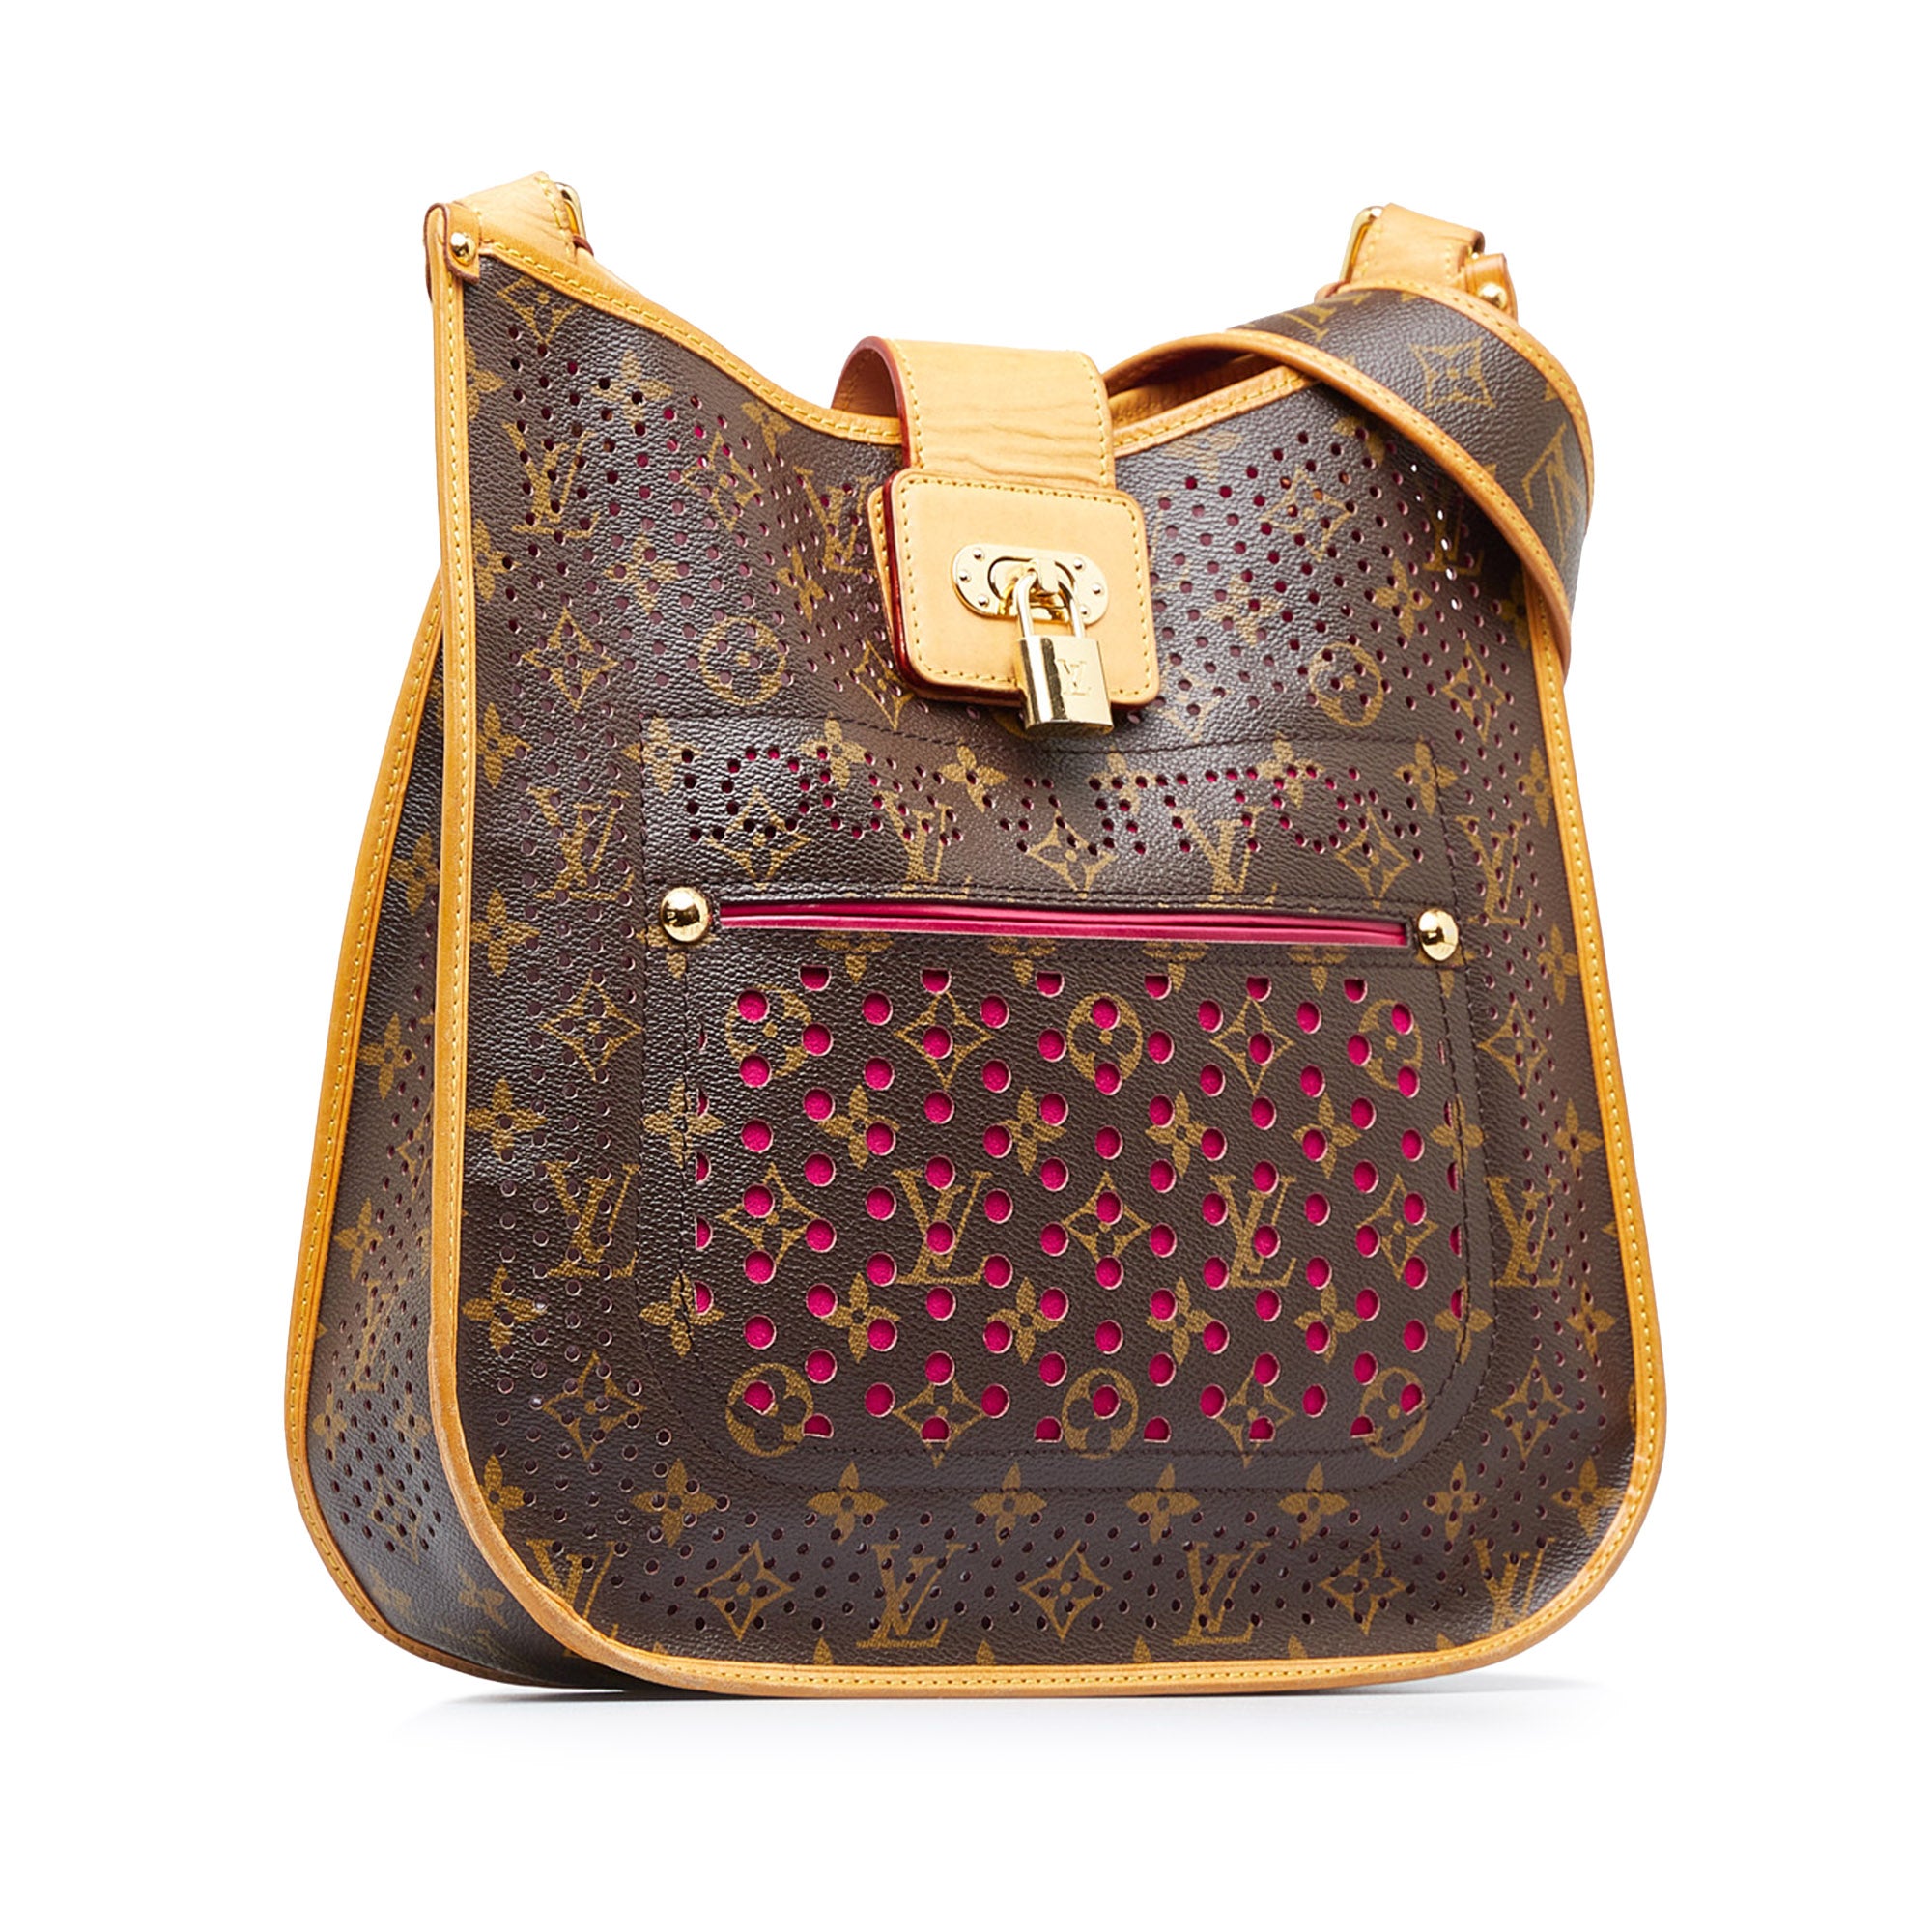 LOUIS VUITTON Limited Edition Perforated Musette Bag (Monogram